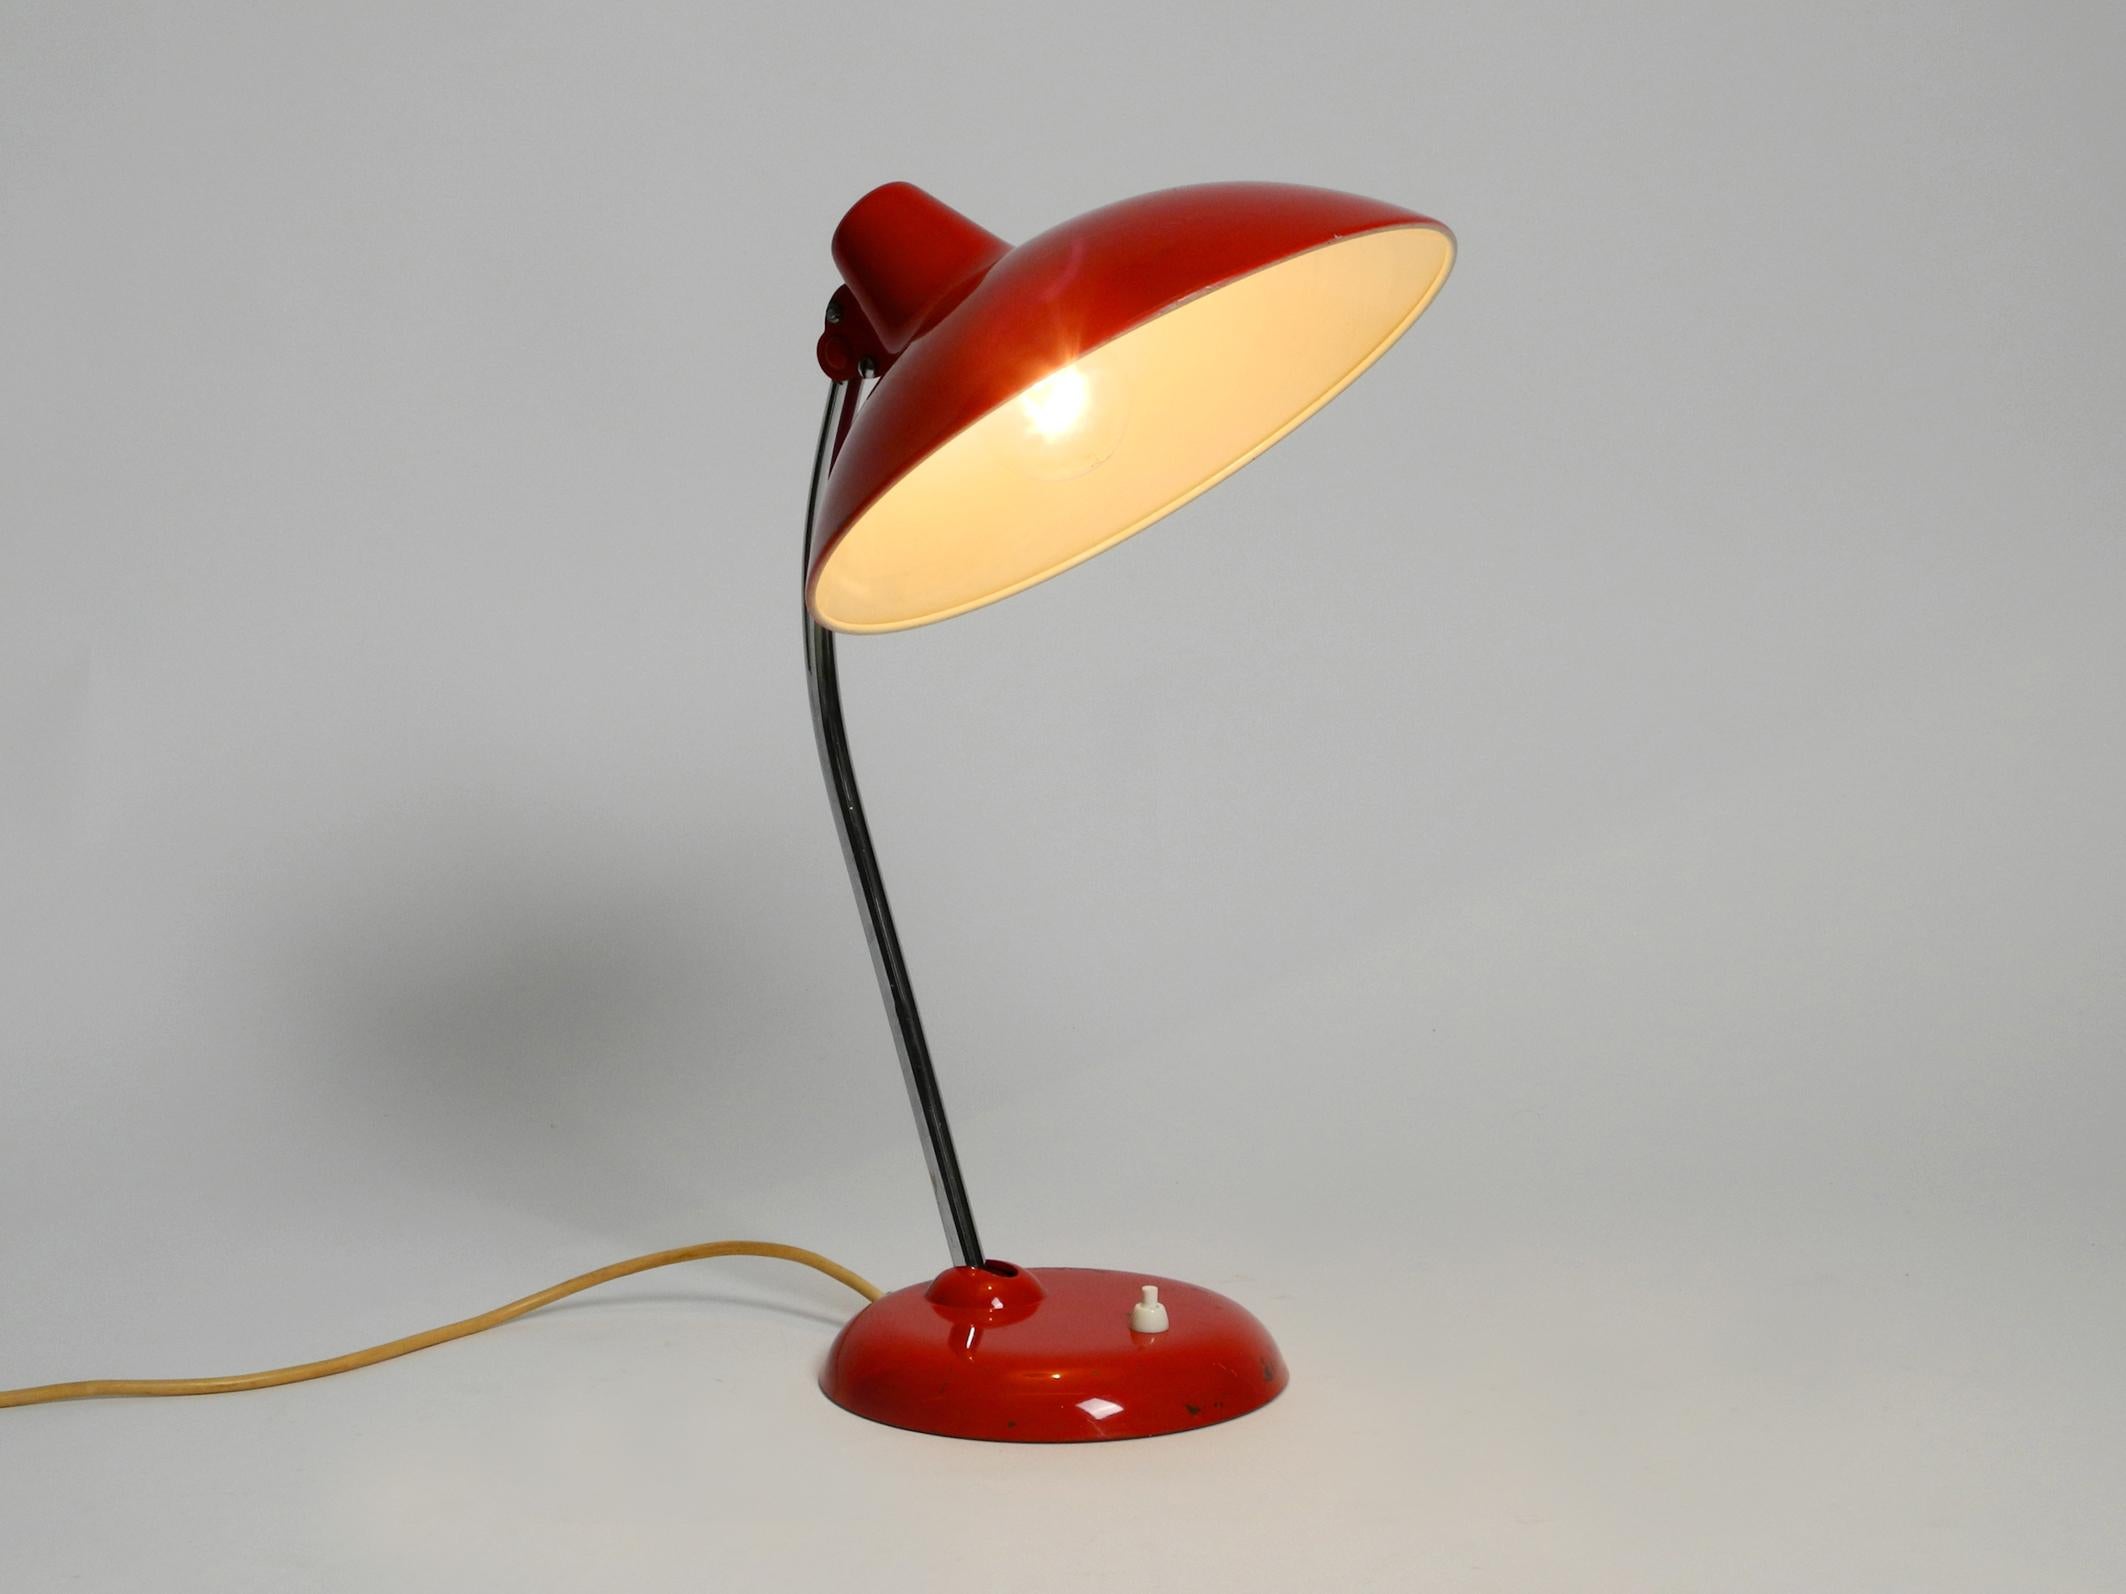 Classic red Kaiser Idell metal table lamp. Model 6786 from the 1960s
Fully functional and 100% original condition. Not refurbished condition with original paint.
No damage to the shade or base, no bumps or dents.
Just a few light scratches on the